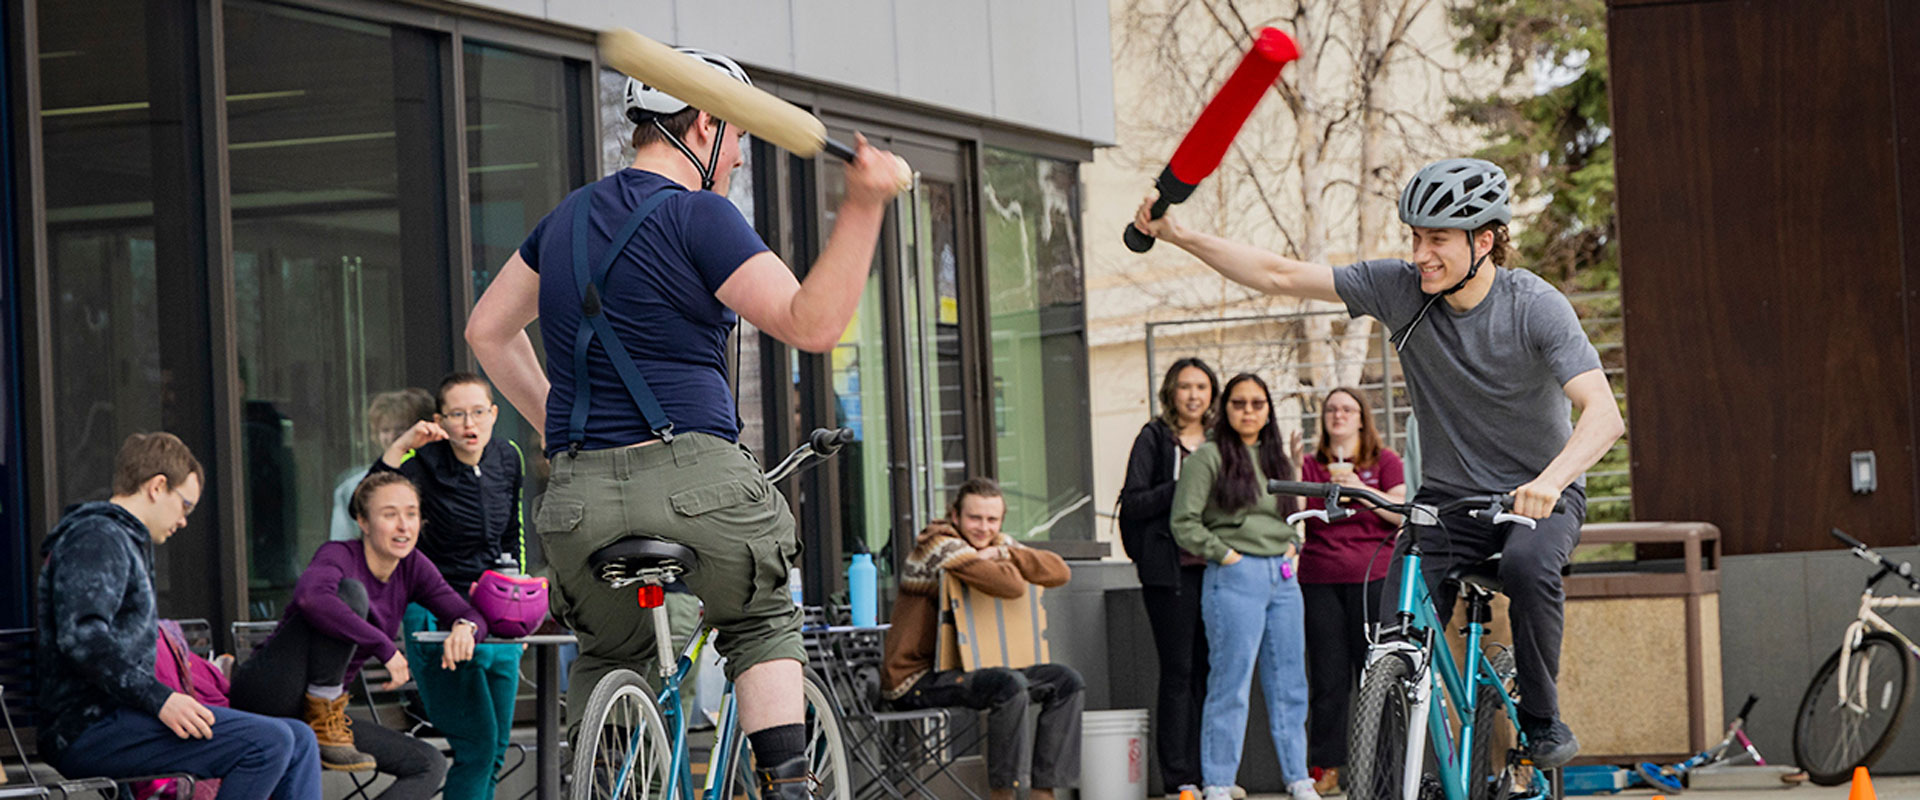 Students participate in a bike jousting activity outside the Wood Center during SpringFest.